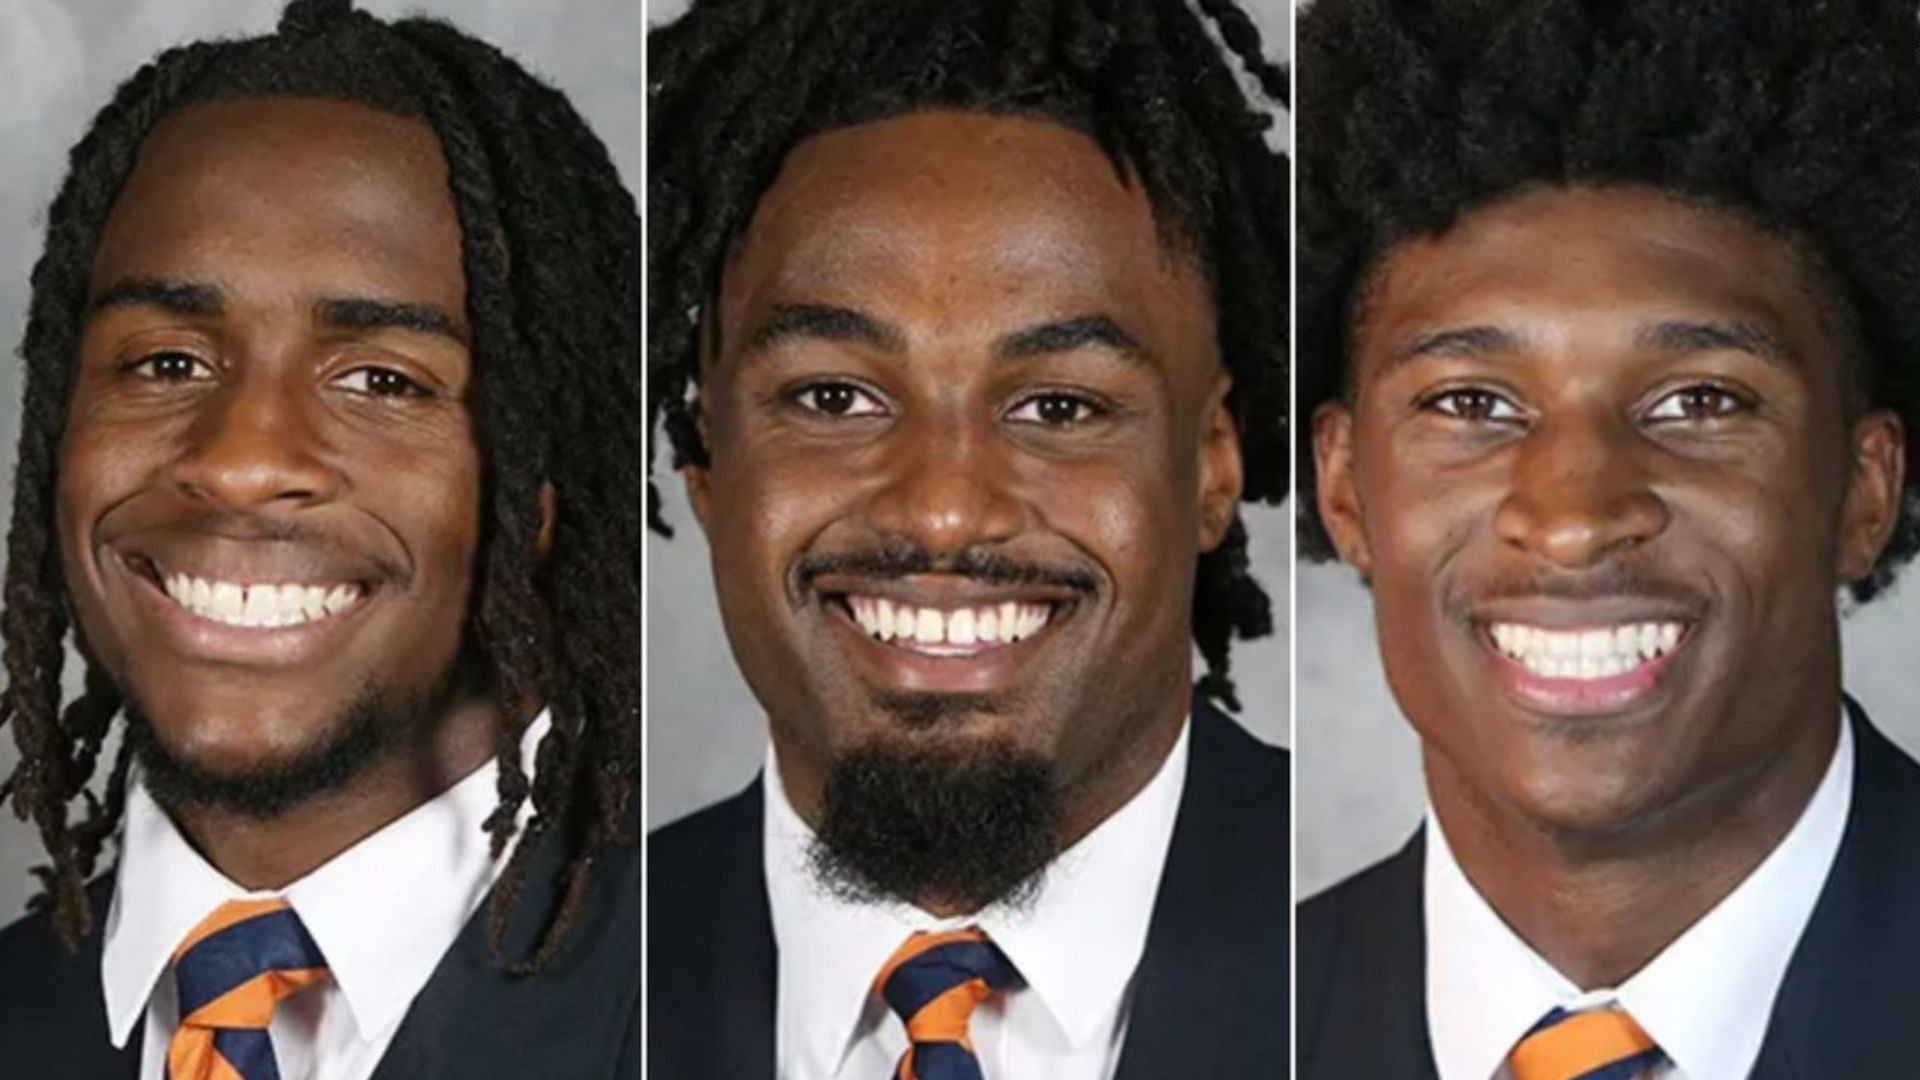 The victims from L to R - Devin Chandler, D&#039;Sean Perry, and Lavel Davis Jr (Image via University of Virginia)